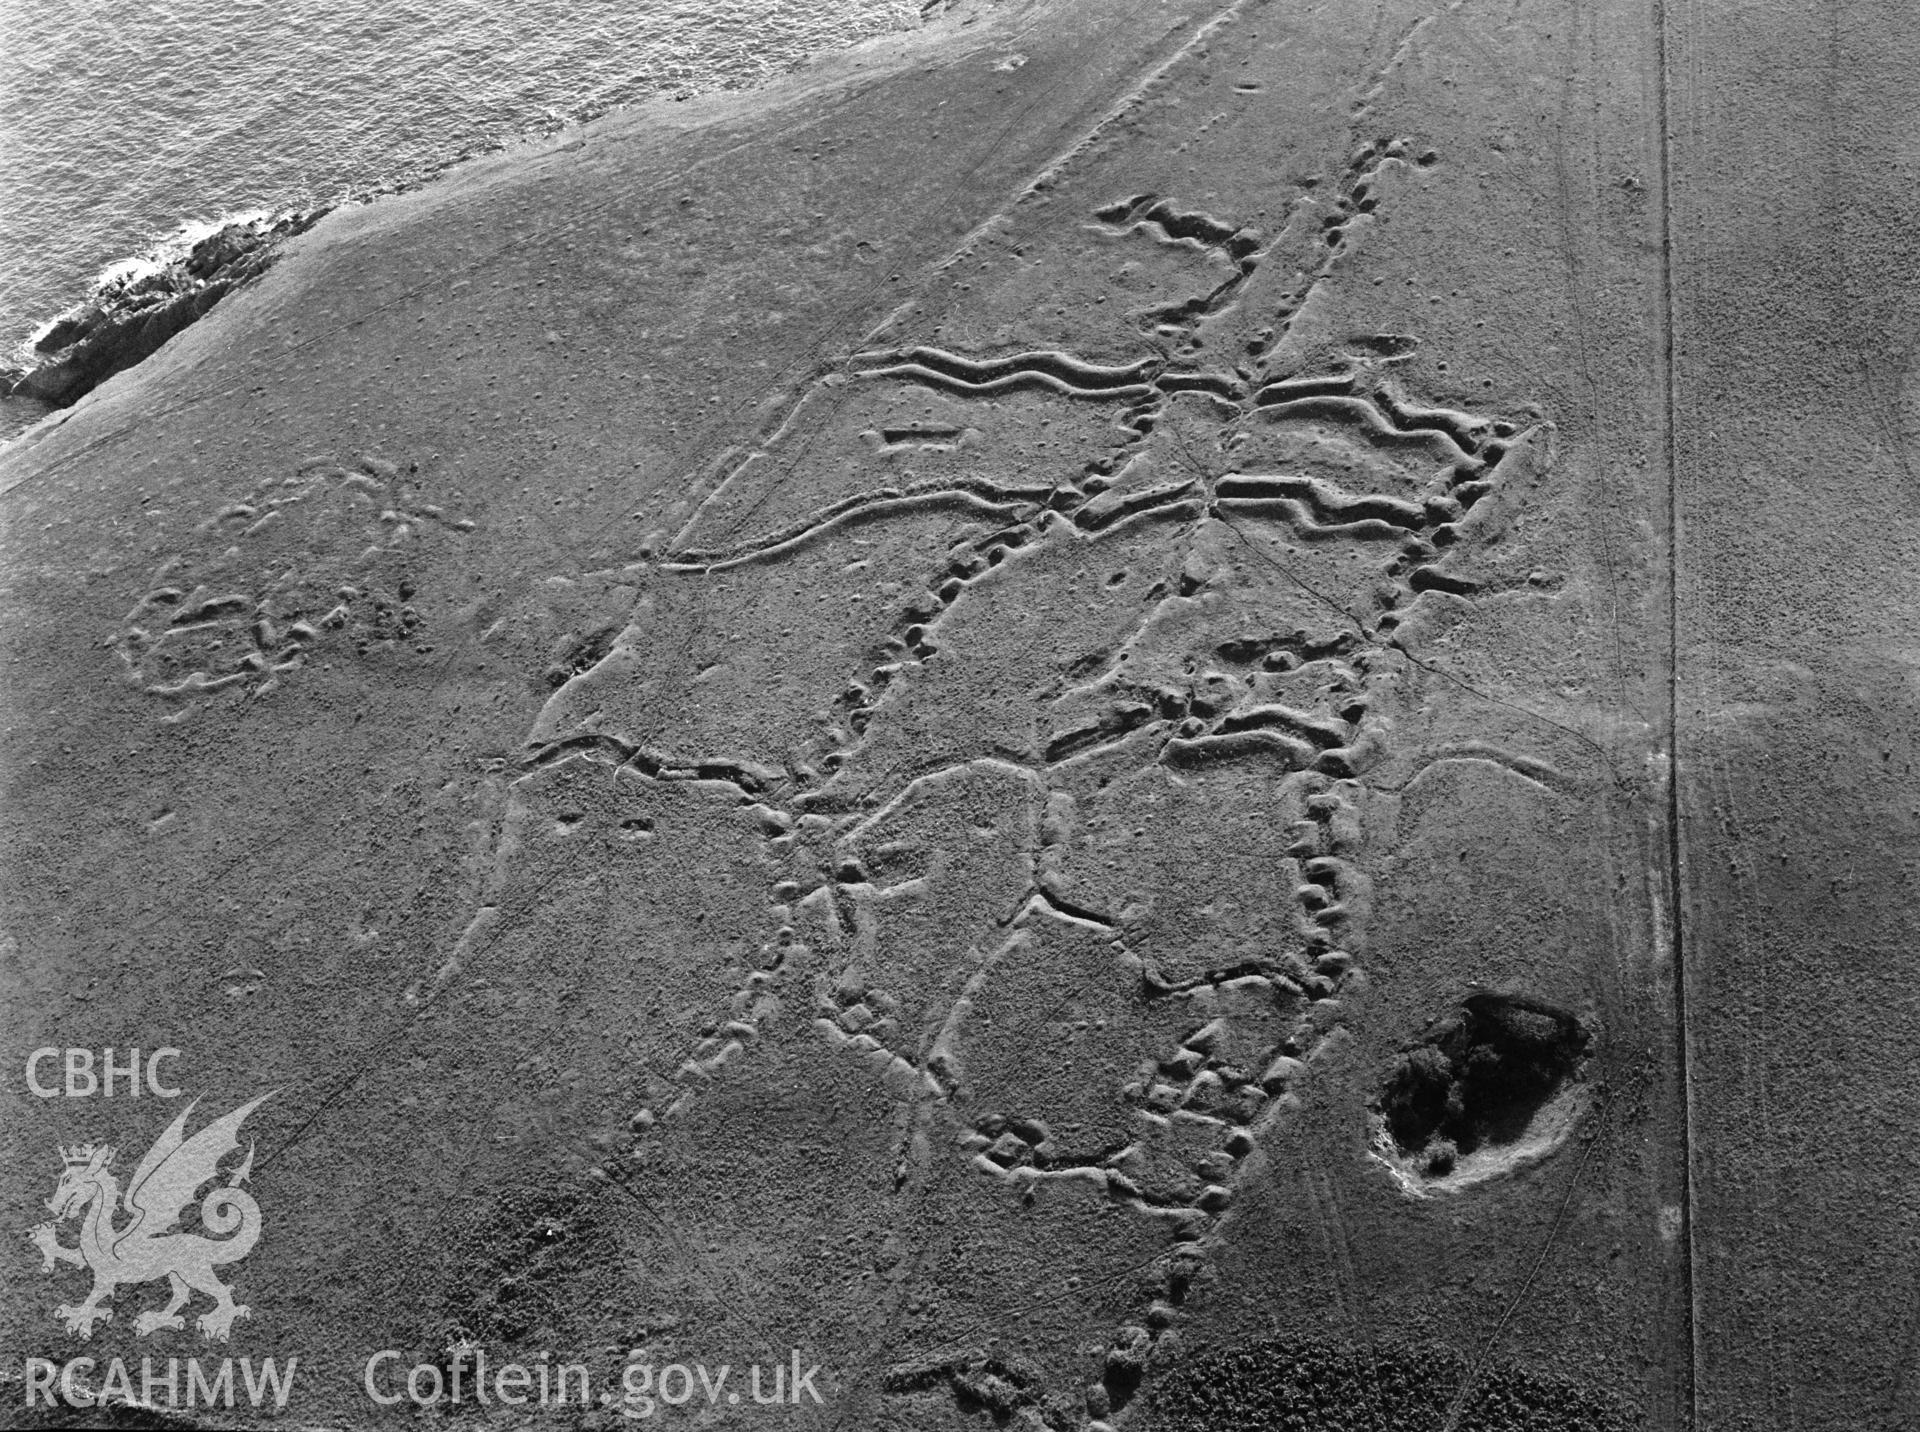 RCAHMW black and white oblique aerial photograph of Penally WW1 Practice Trench system. Taken by Toby Driver on 02/09/2002